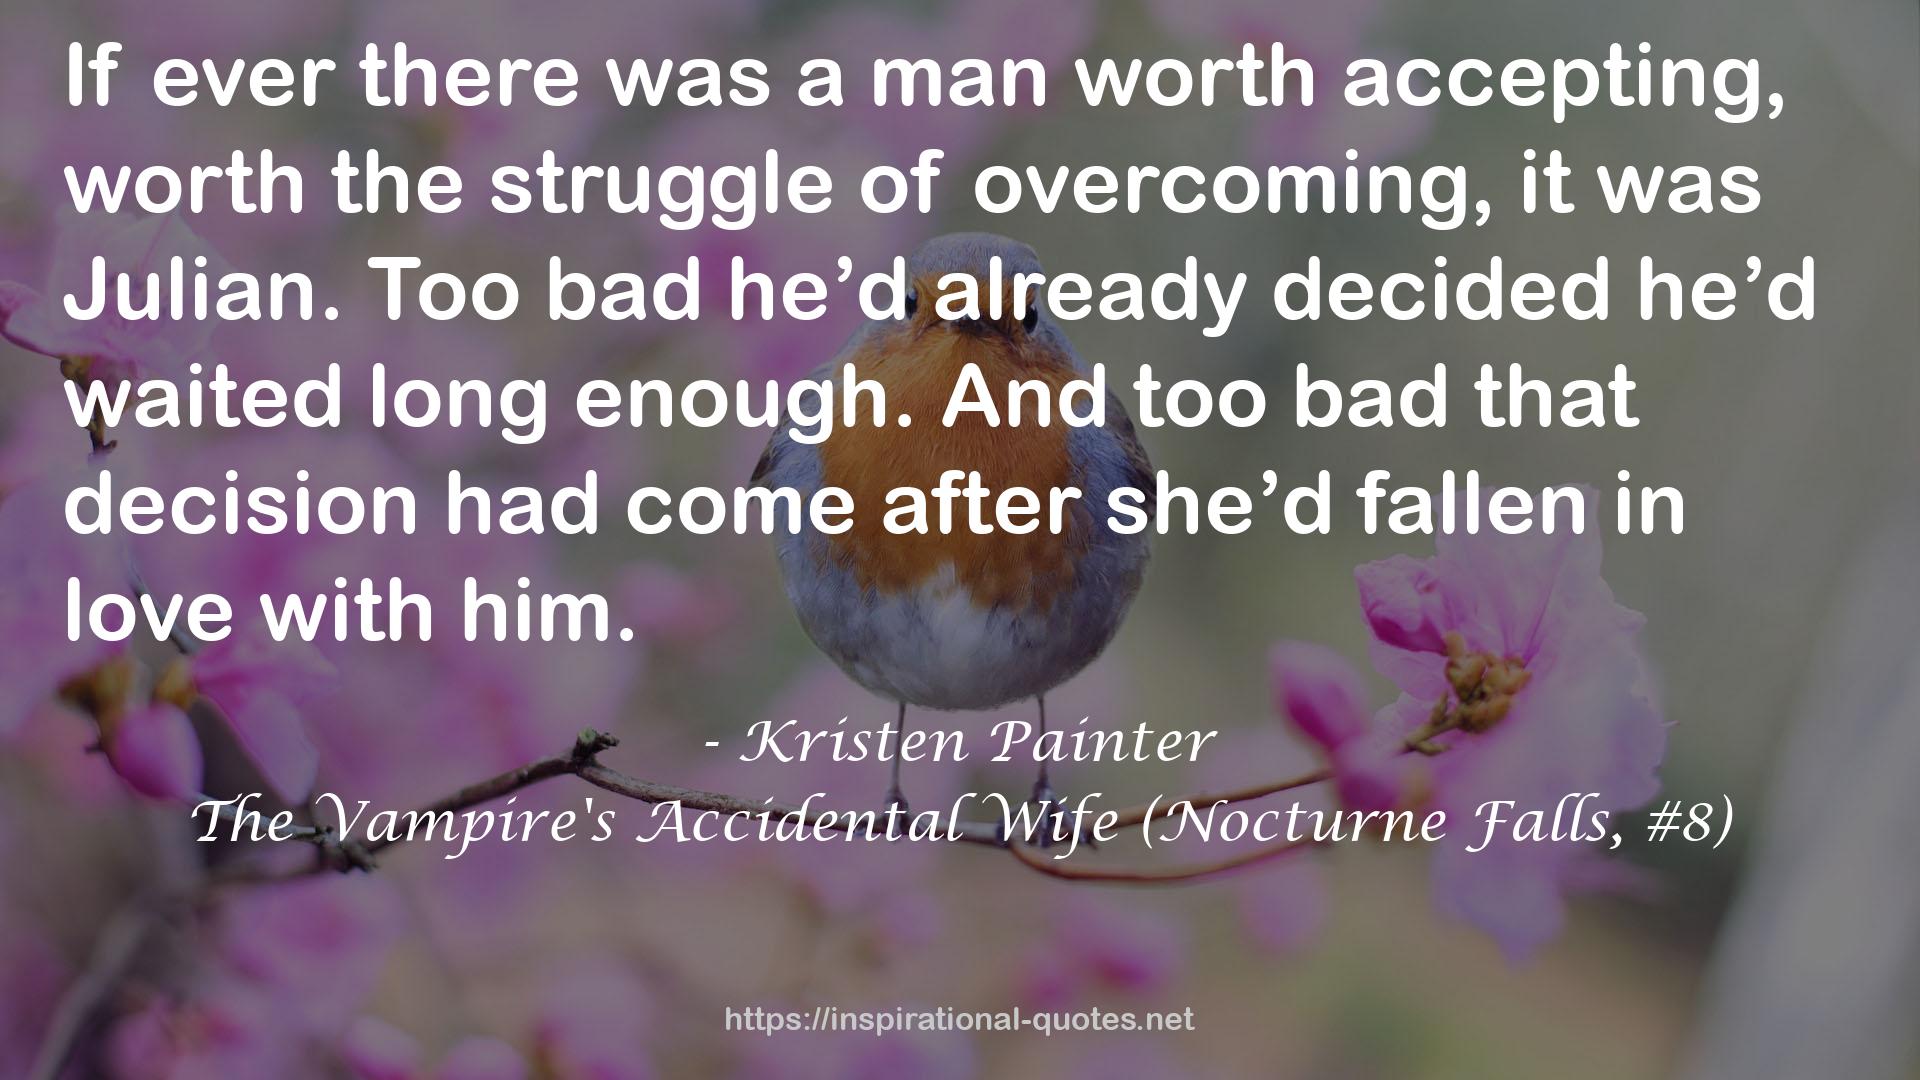 The Vampire's Accidental Wife (Nocturne Falls, #8) QUOTES